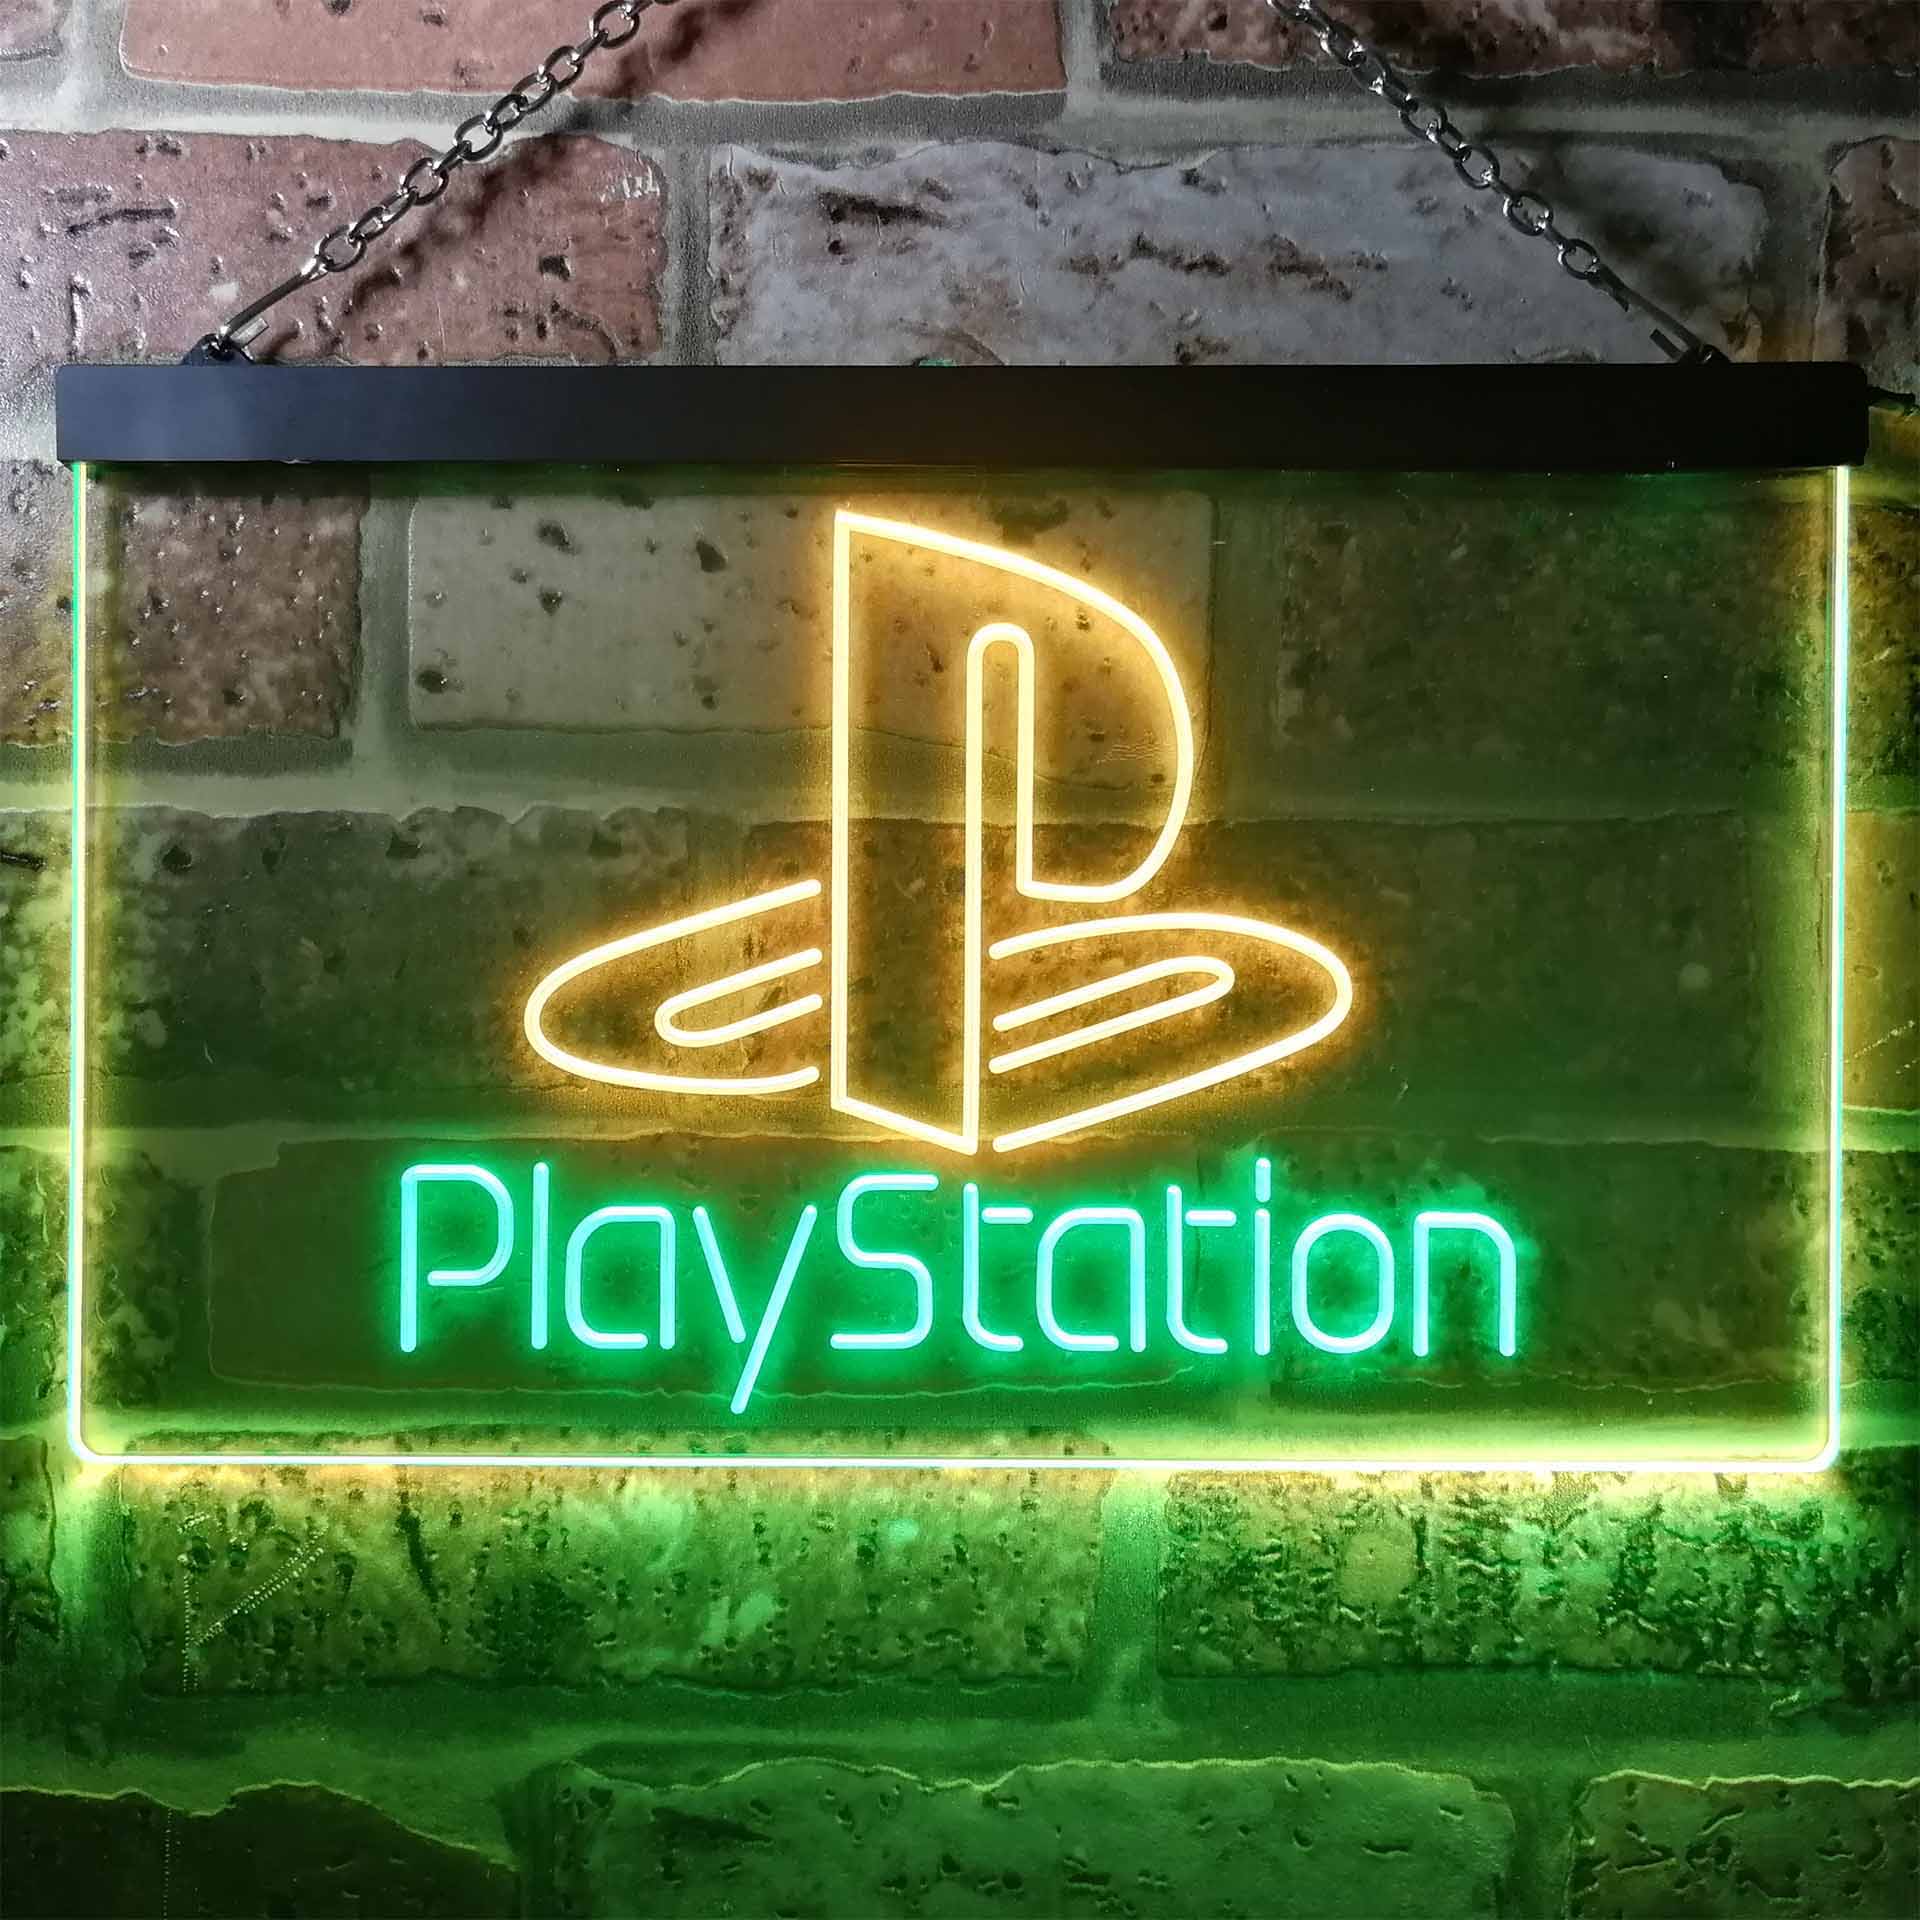 Playstation Game Room Kid Neon LED Sign Gaming Room Decor